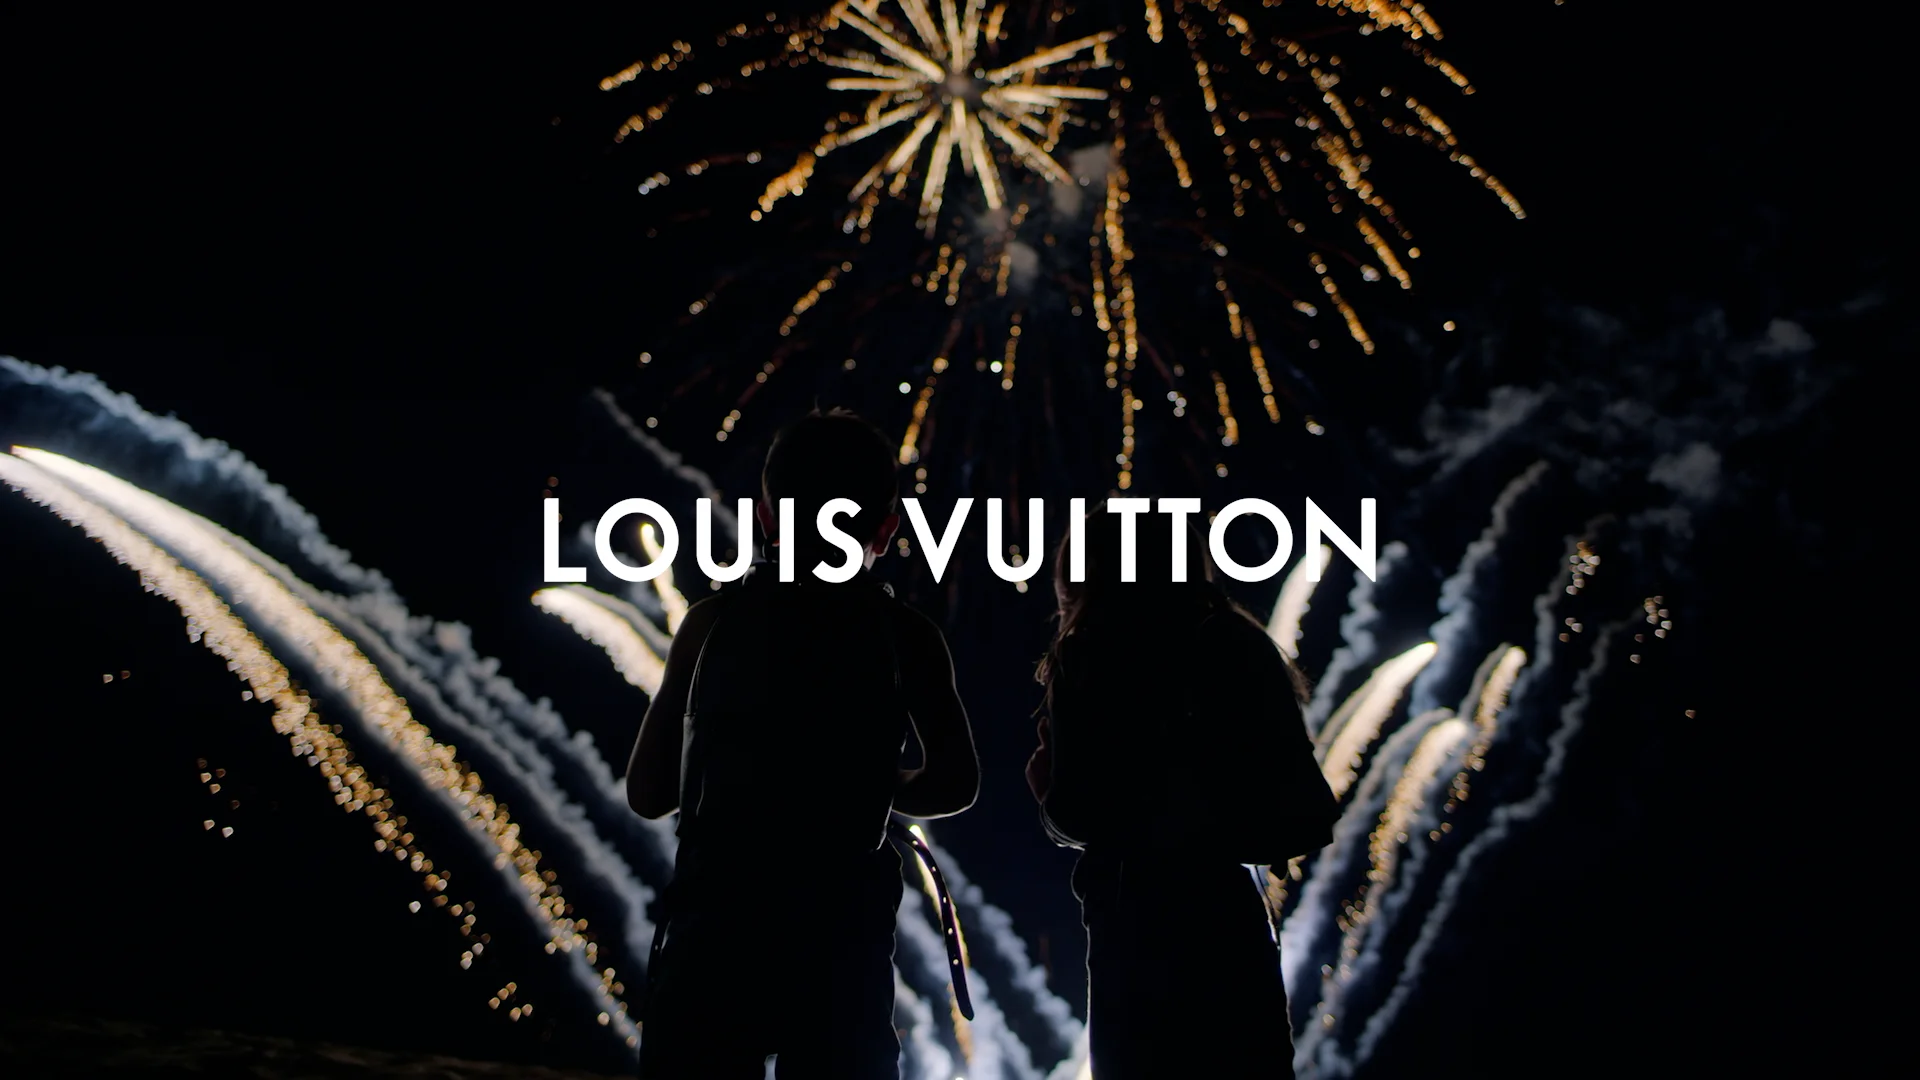 Discovering Louis Vuitton – Wanderful Whirled